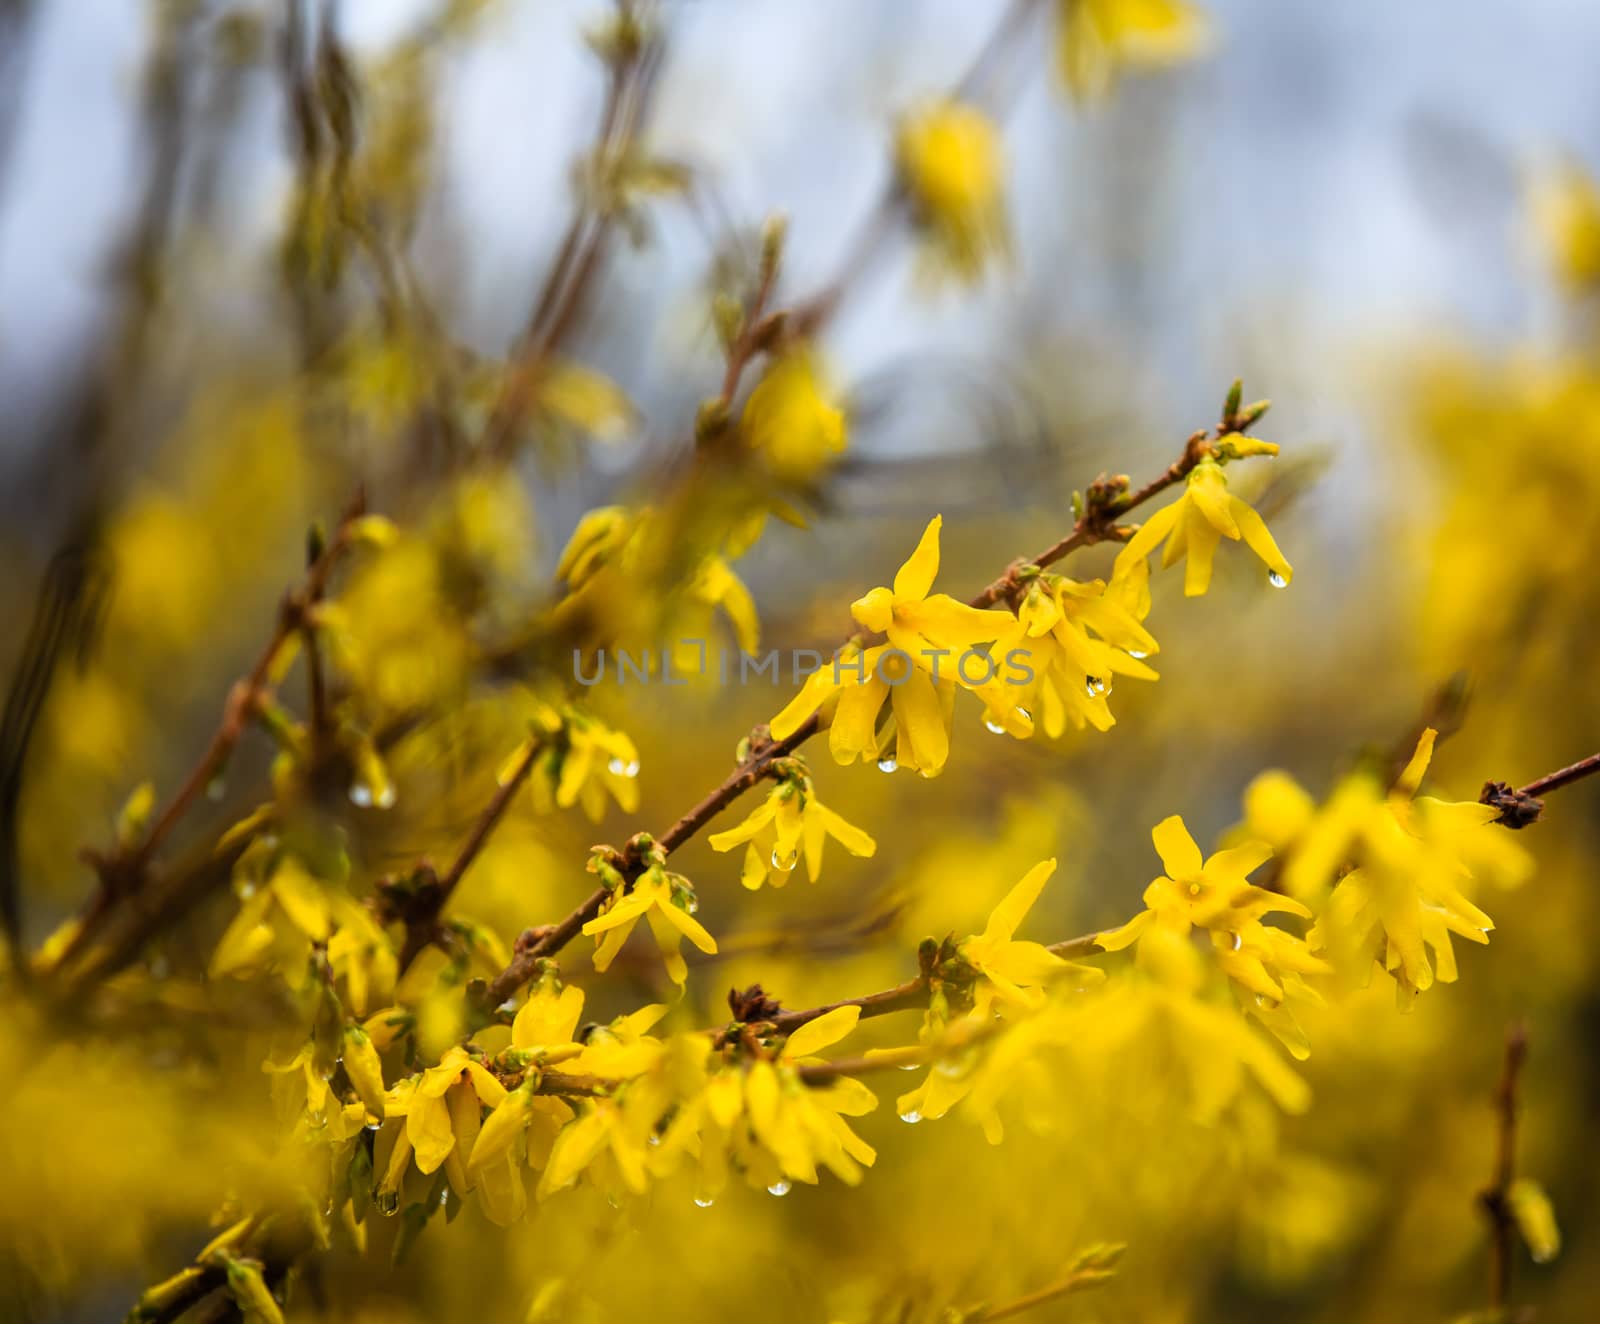 forsythia flower twigs with rain drops hanging on petals